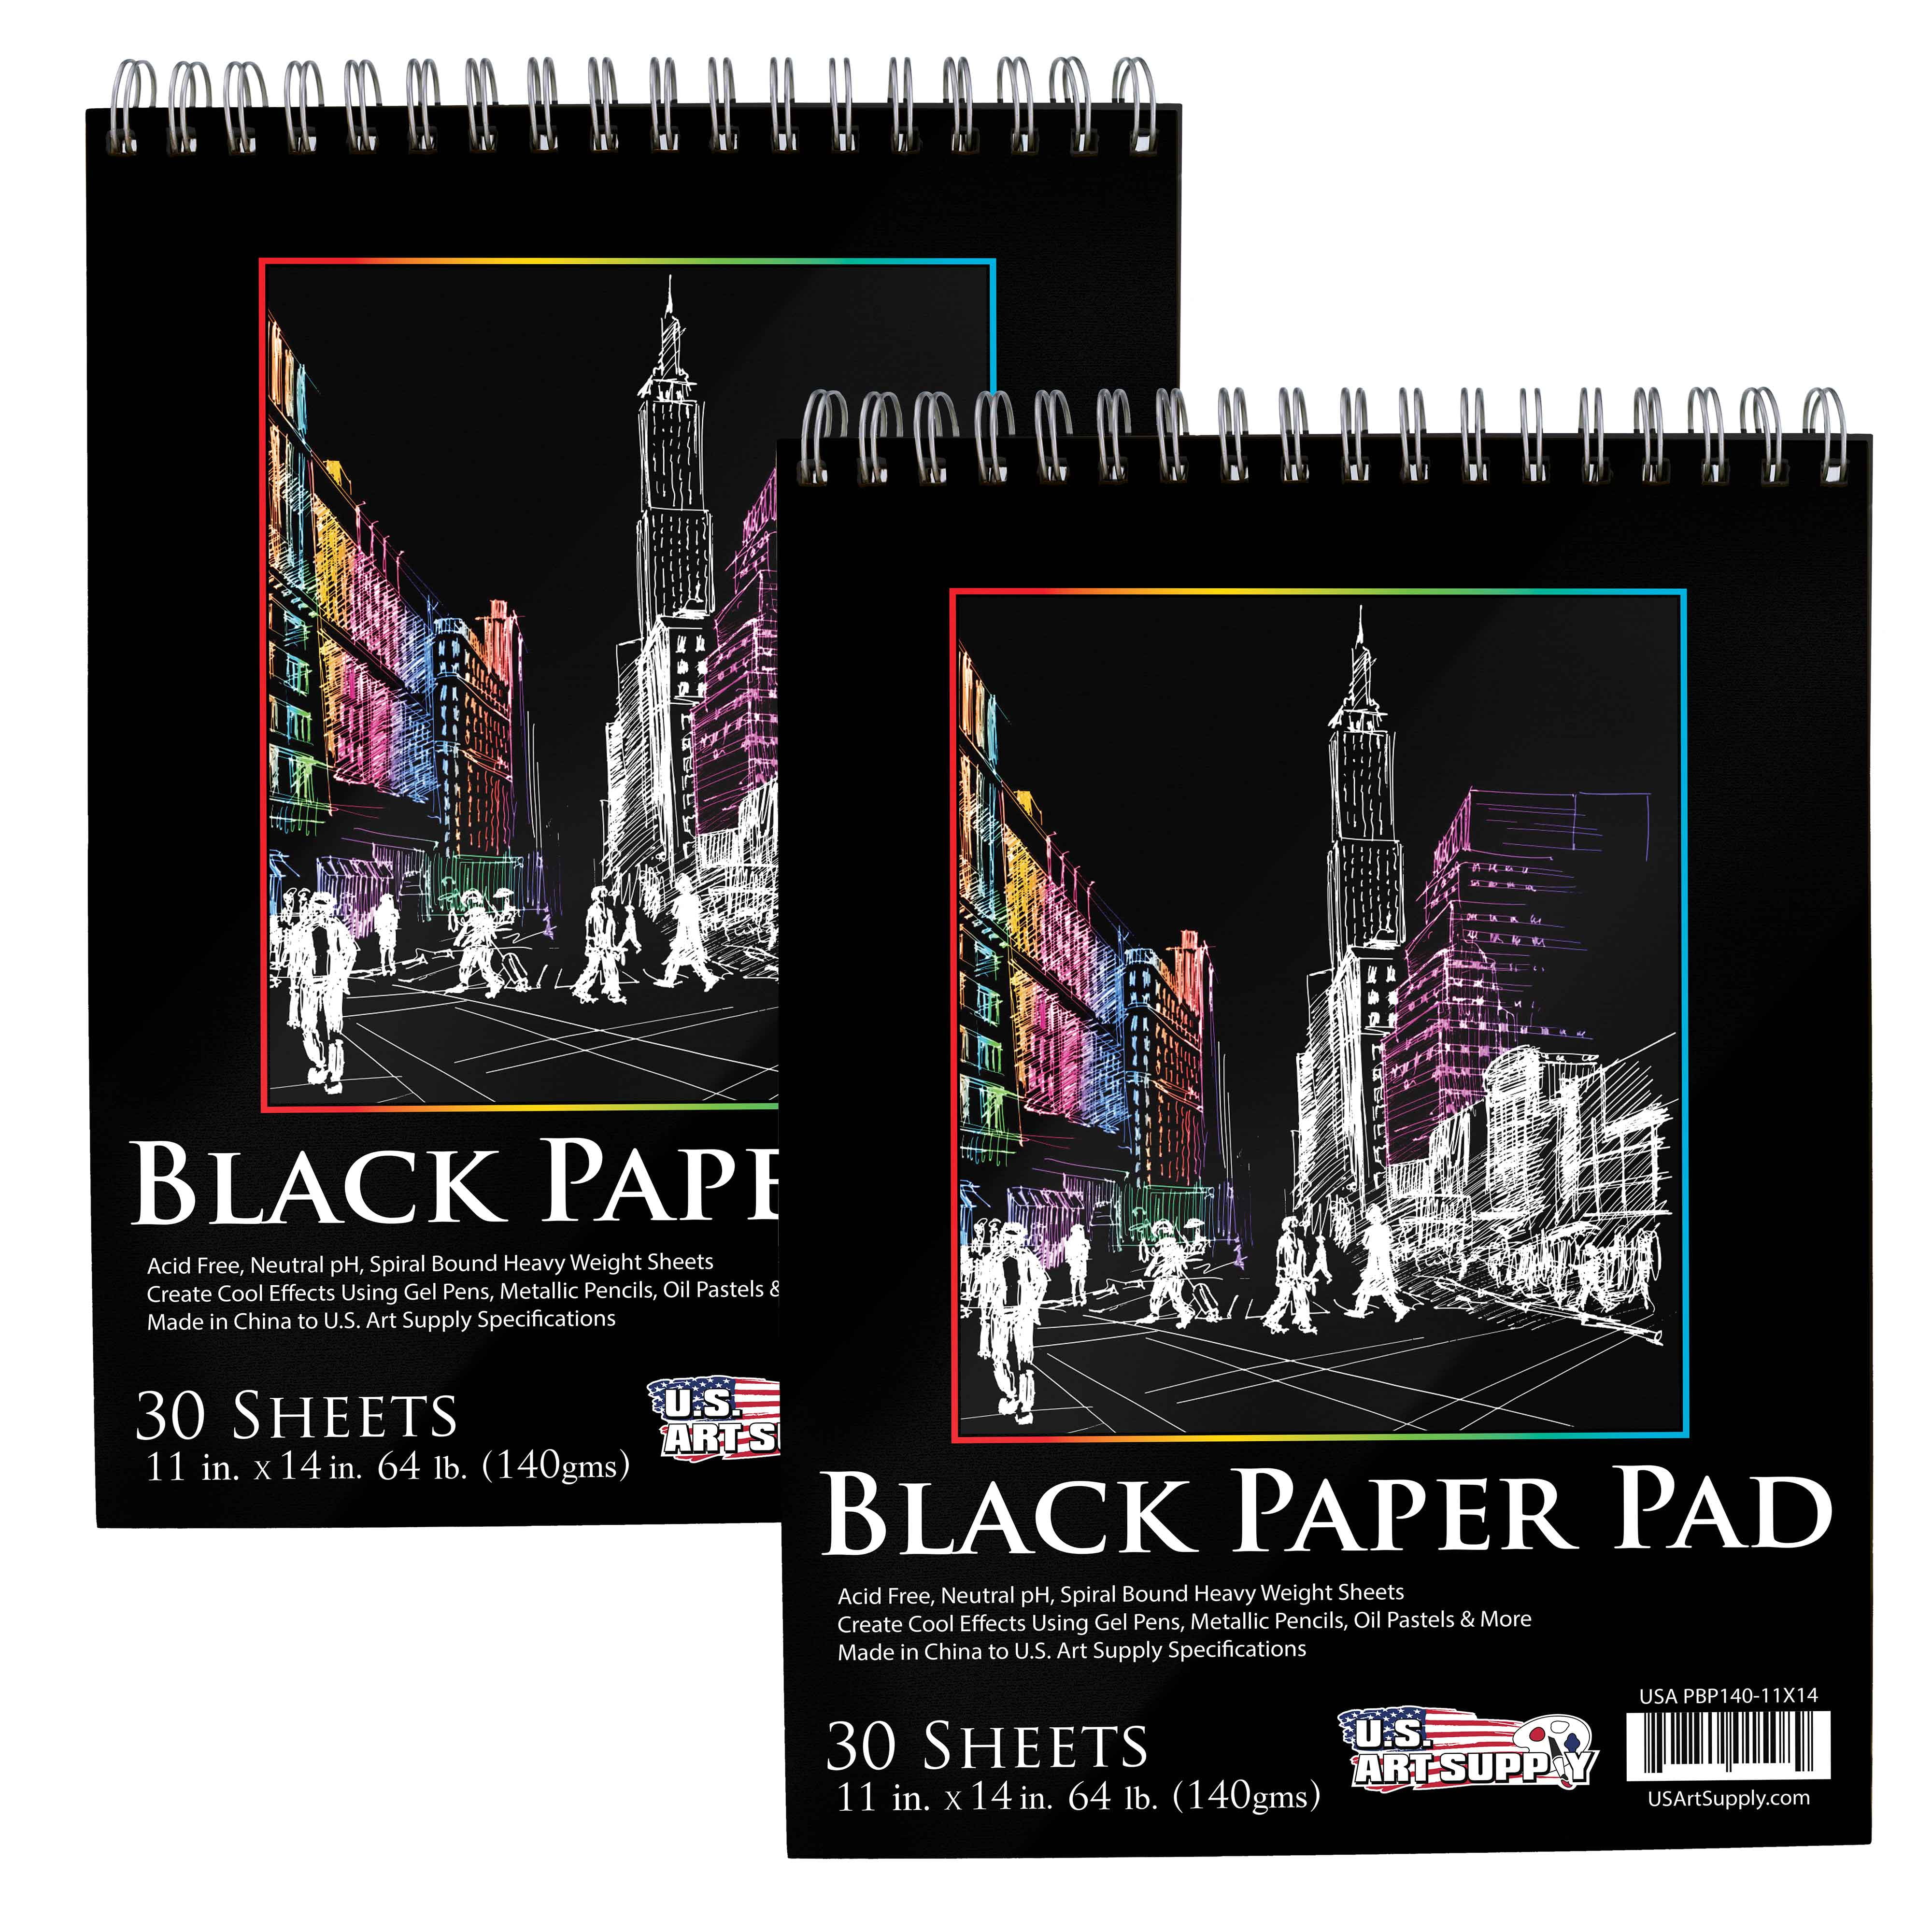 U.S. Art Supply 11 x 14 Premium Heavy-Weight Paper Spiral Bound Sketch Pad, 90 Pound (160gsm), Pad of 30-Sheets (Pack of 2 Pads)